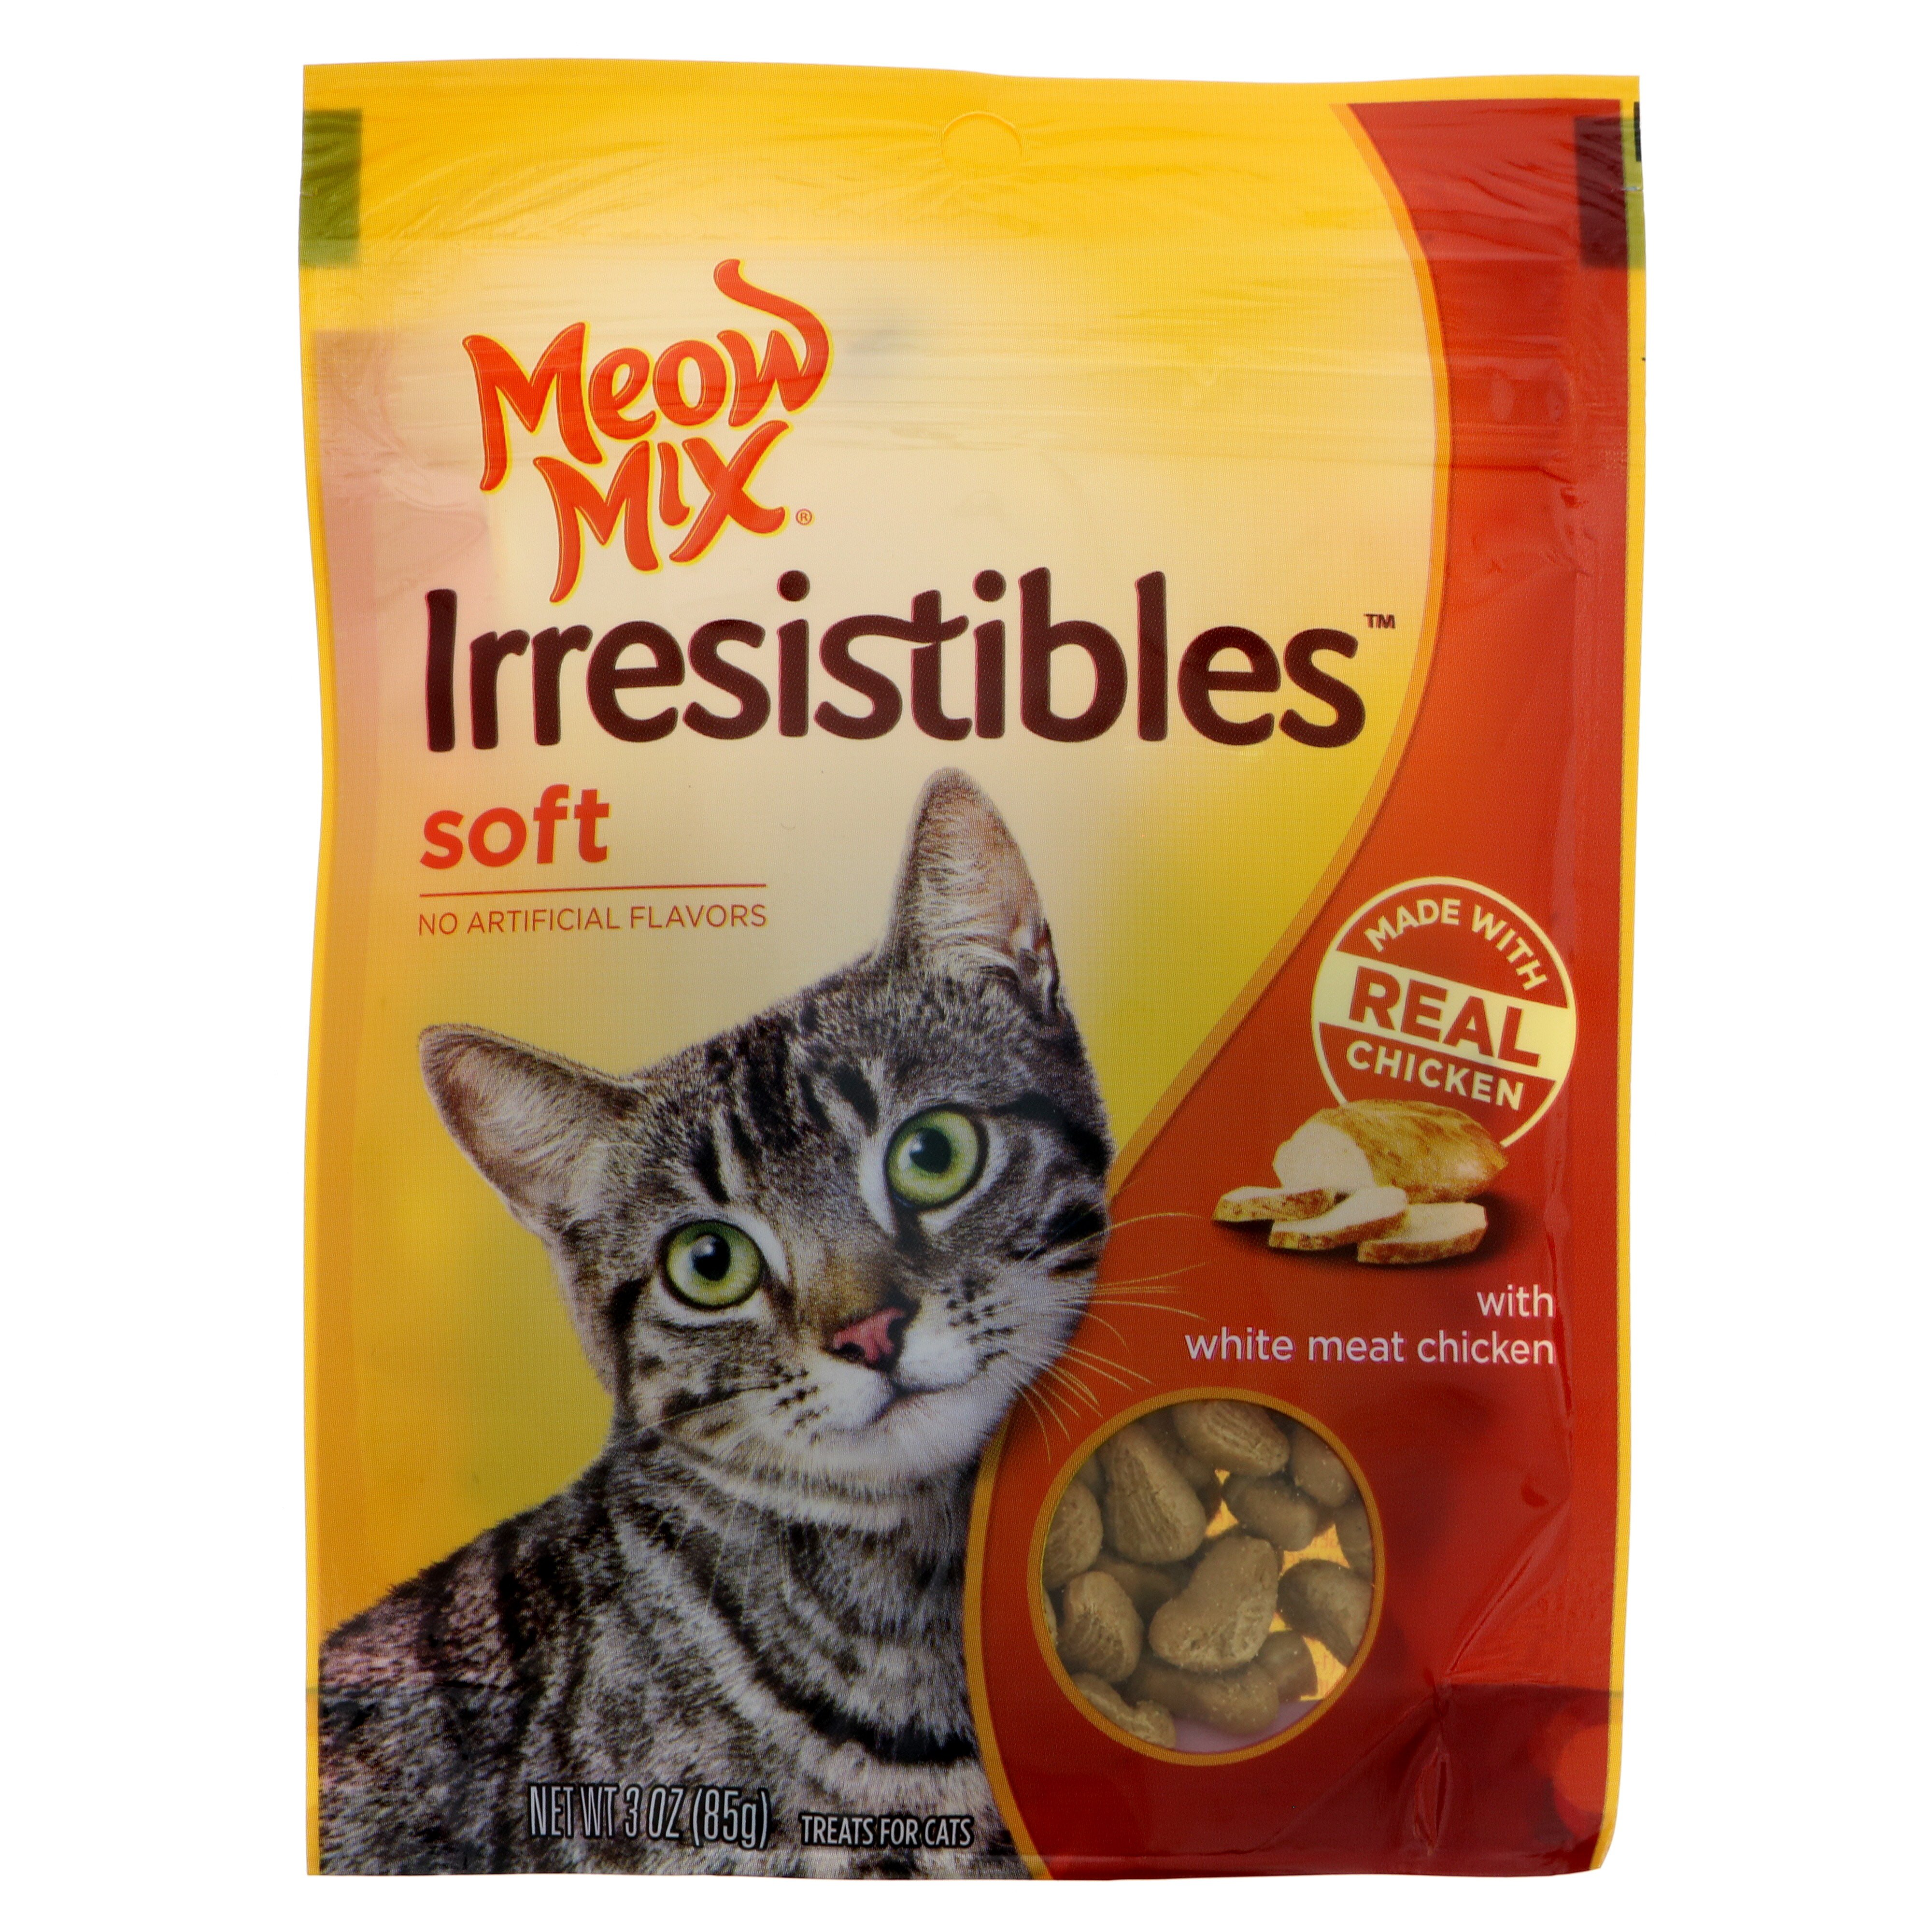 Meow Mix Irresistibles Soft White Meat Chicken, Treats Shop Cats at HEB